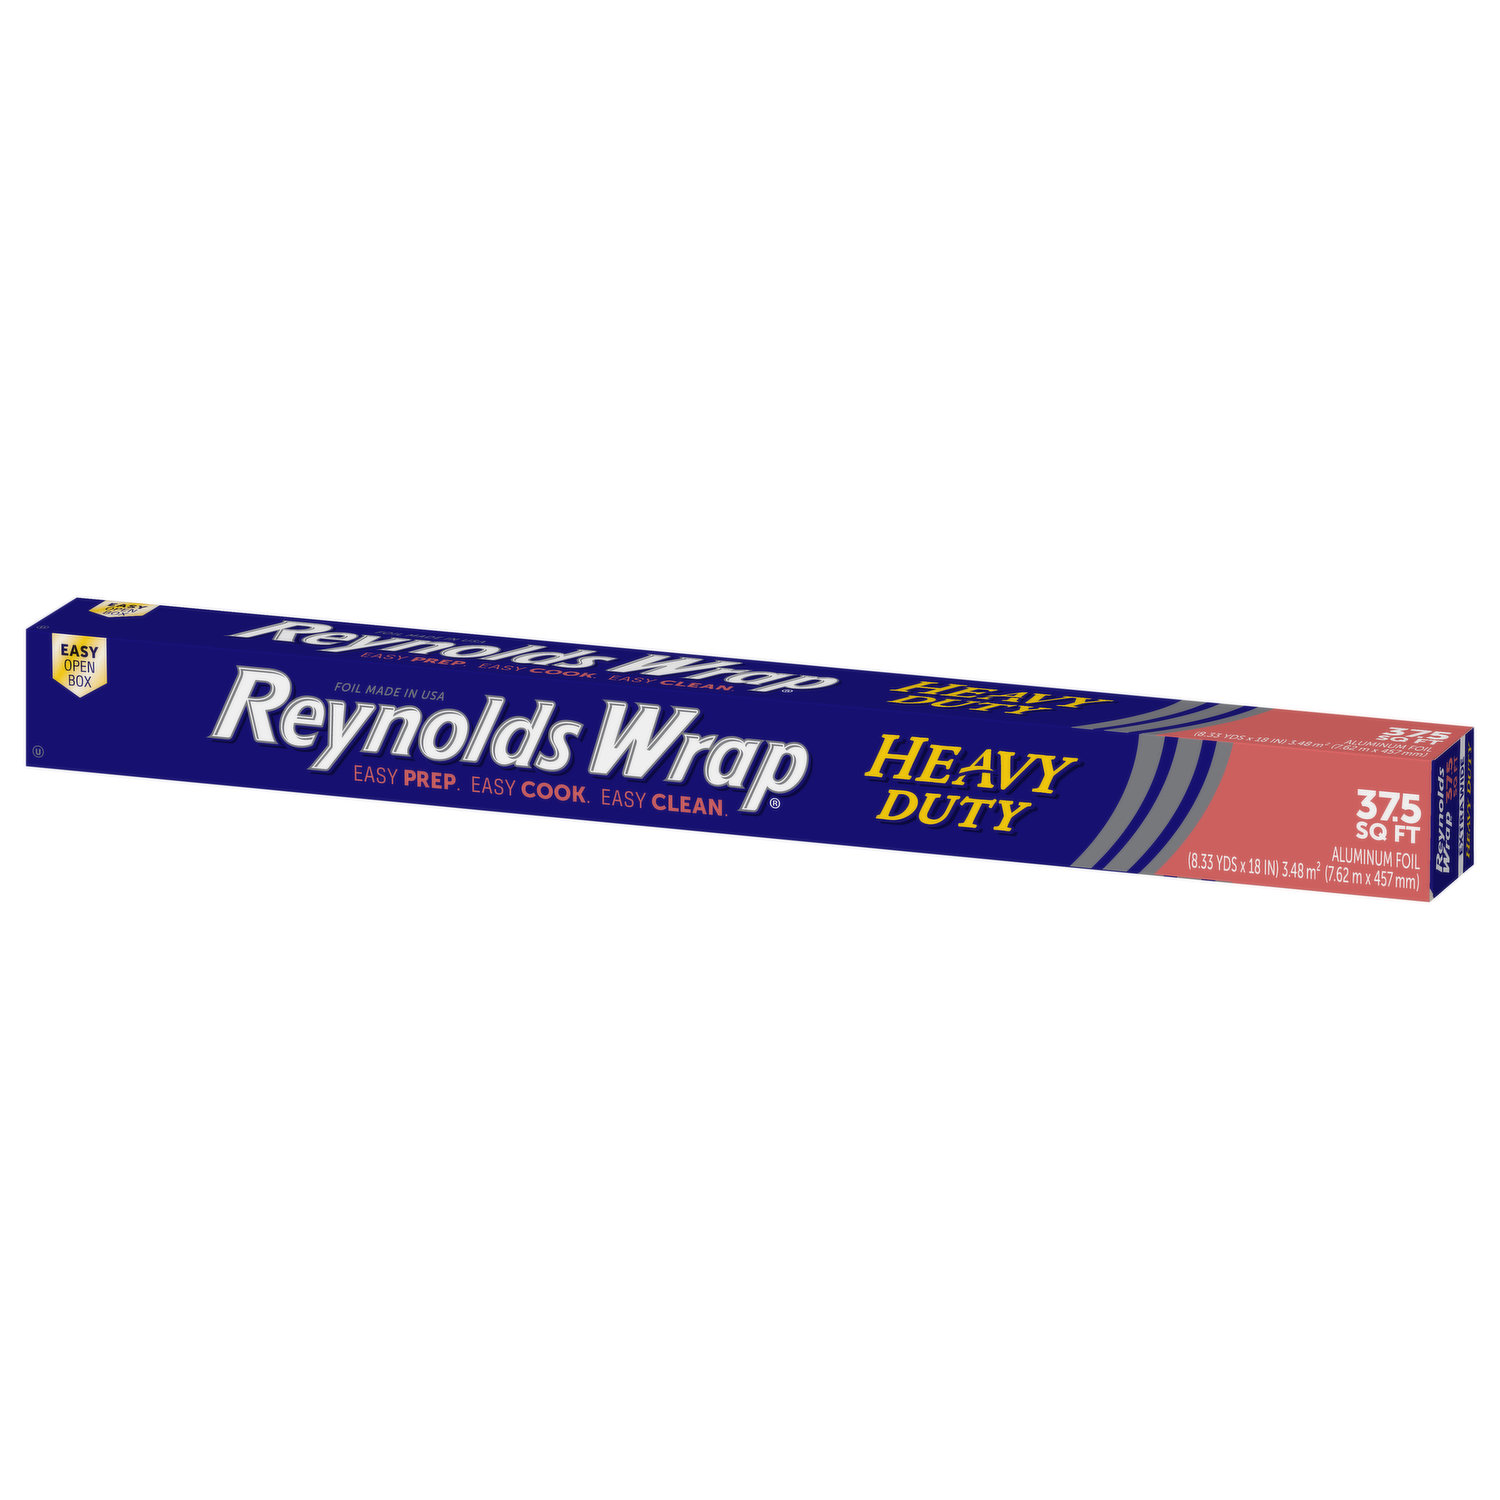 REYNOLDS Wrap Heavy Duty Aluminum Foil, 37.5 Square-Foot Roll (Pack of 1)